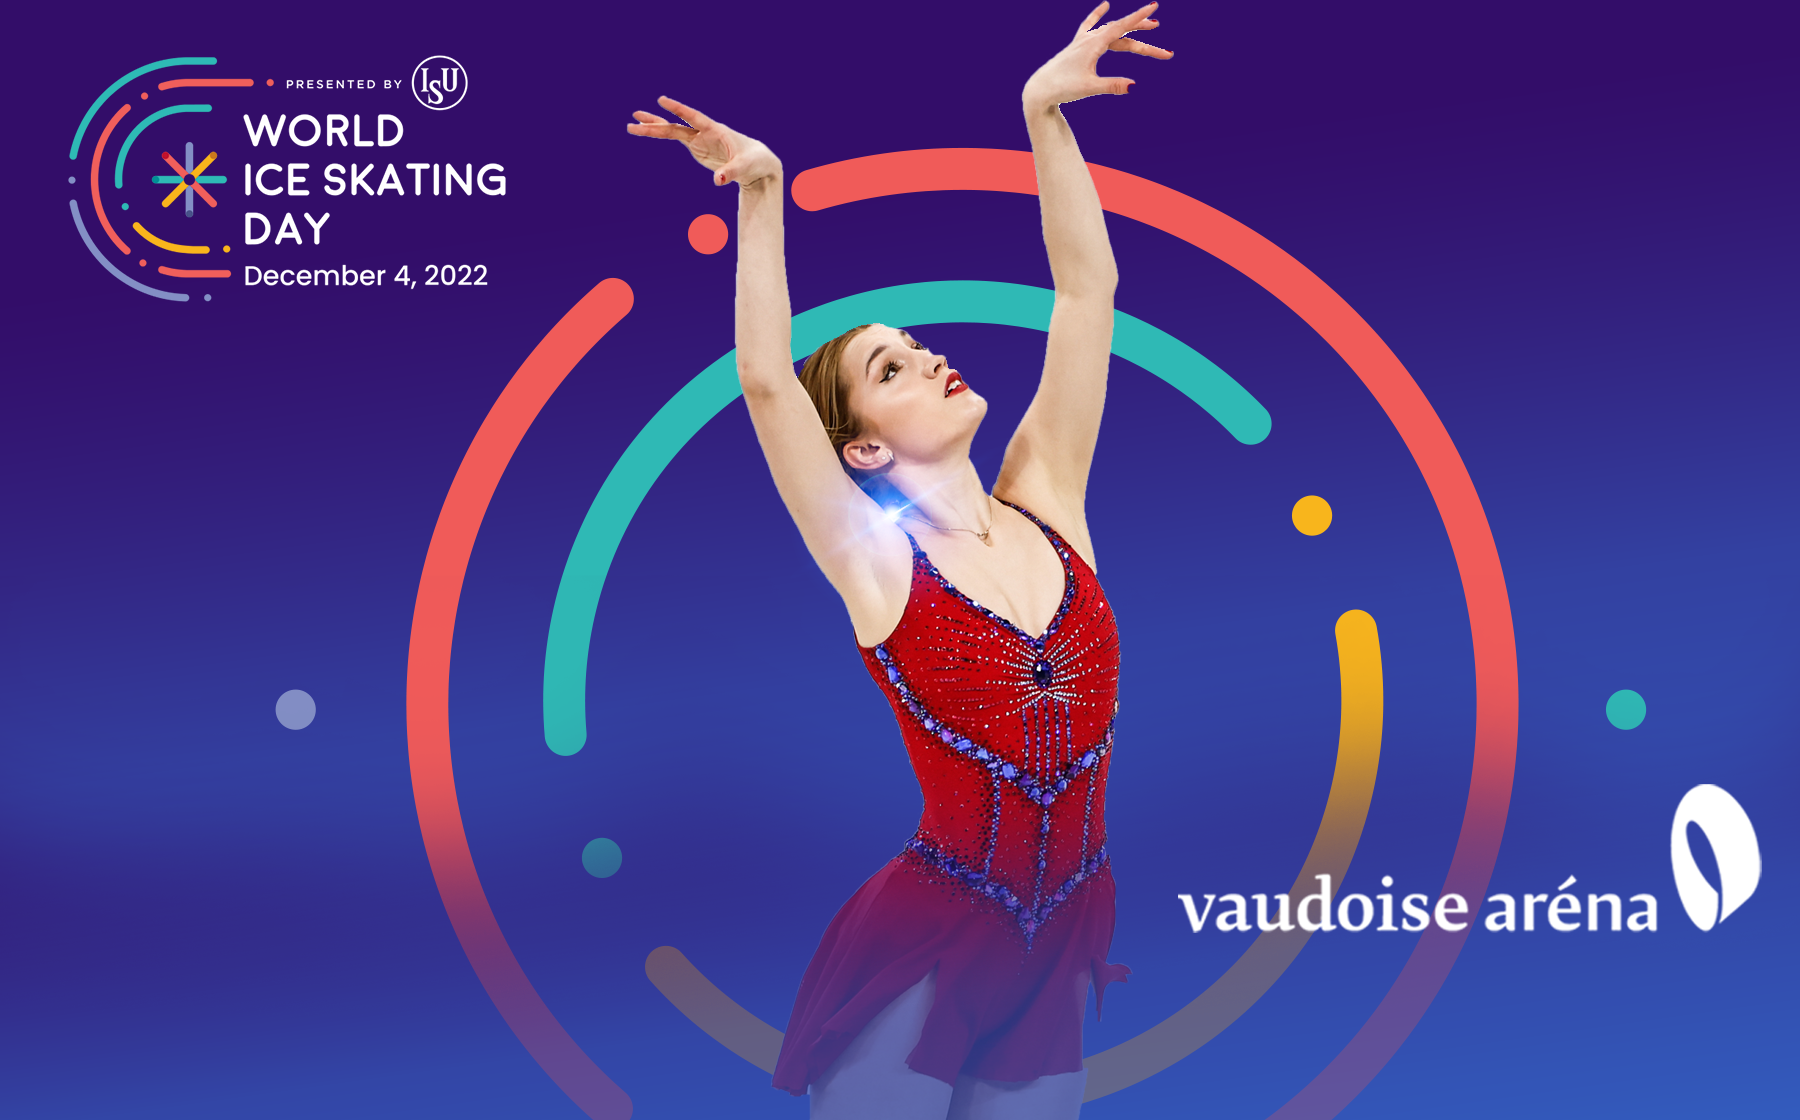 Alexia Paganini is due to feature as part of events in Lausanne on the first World Ice Skating Day ©ISU